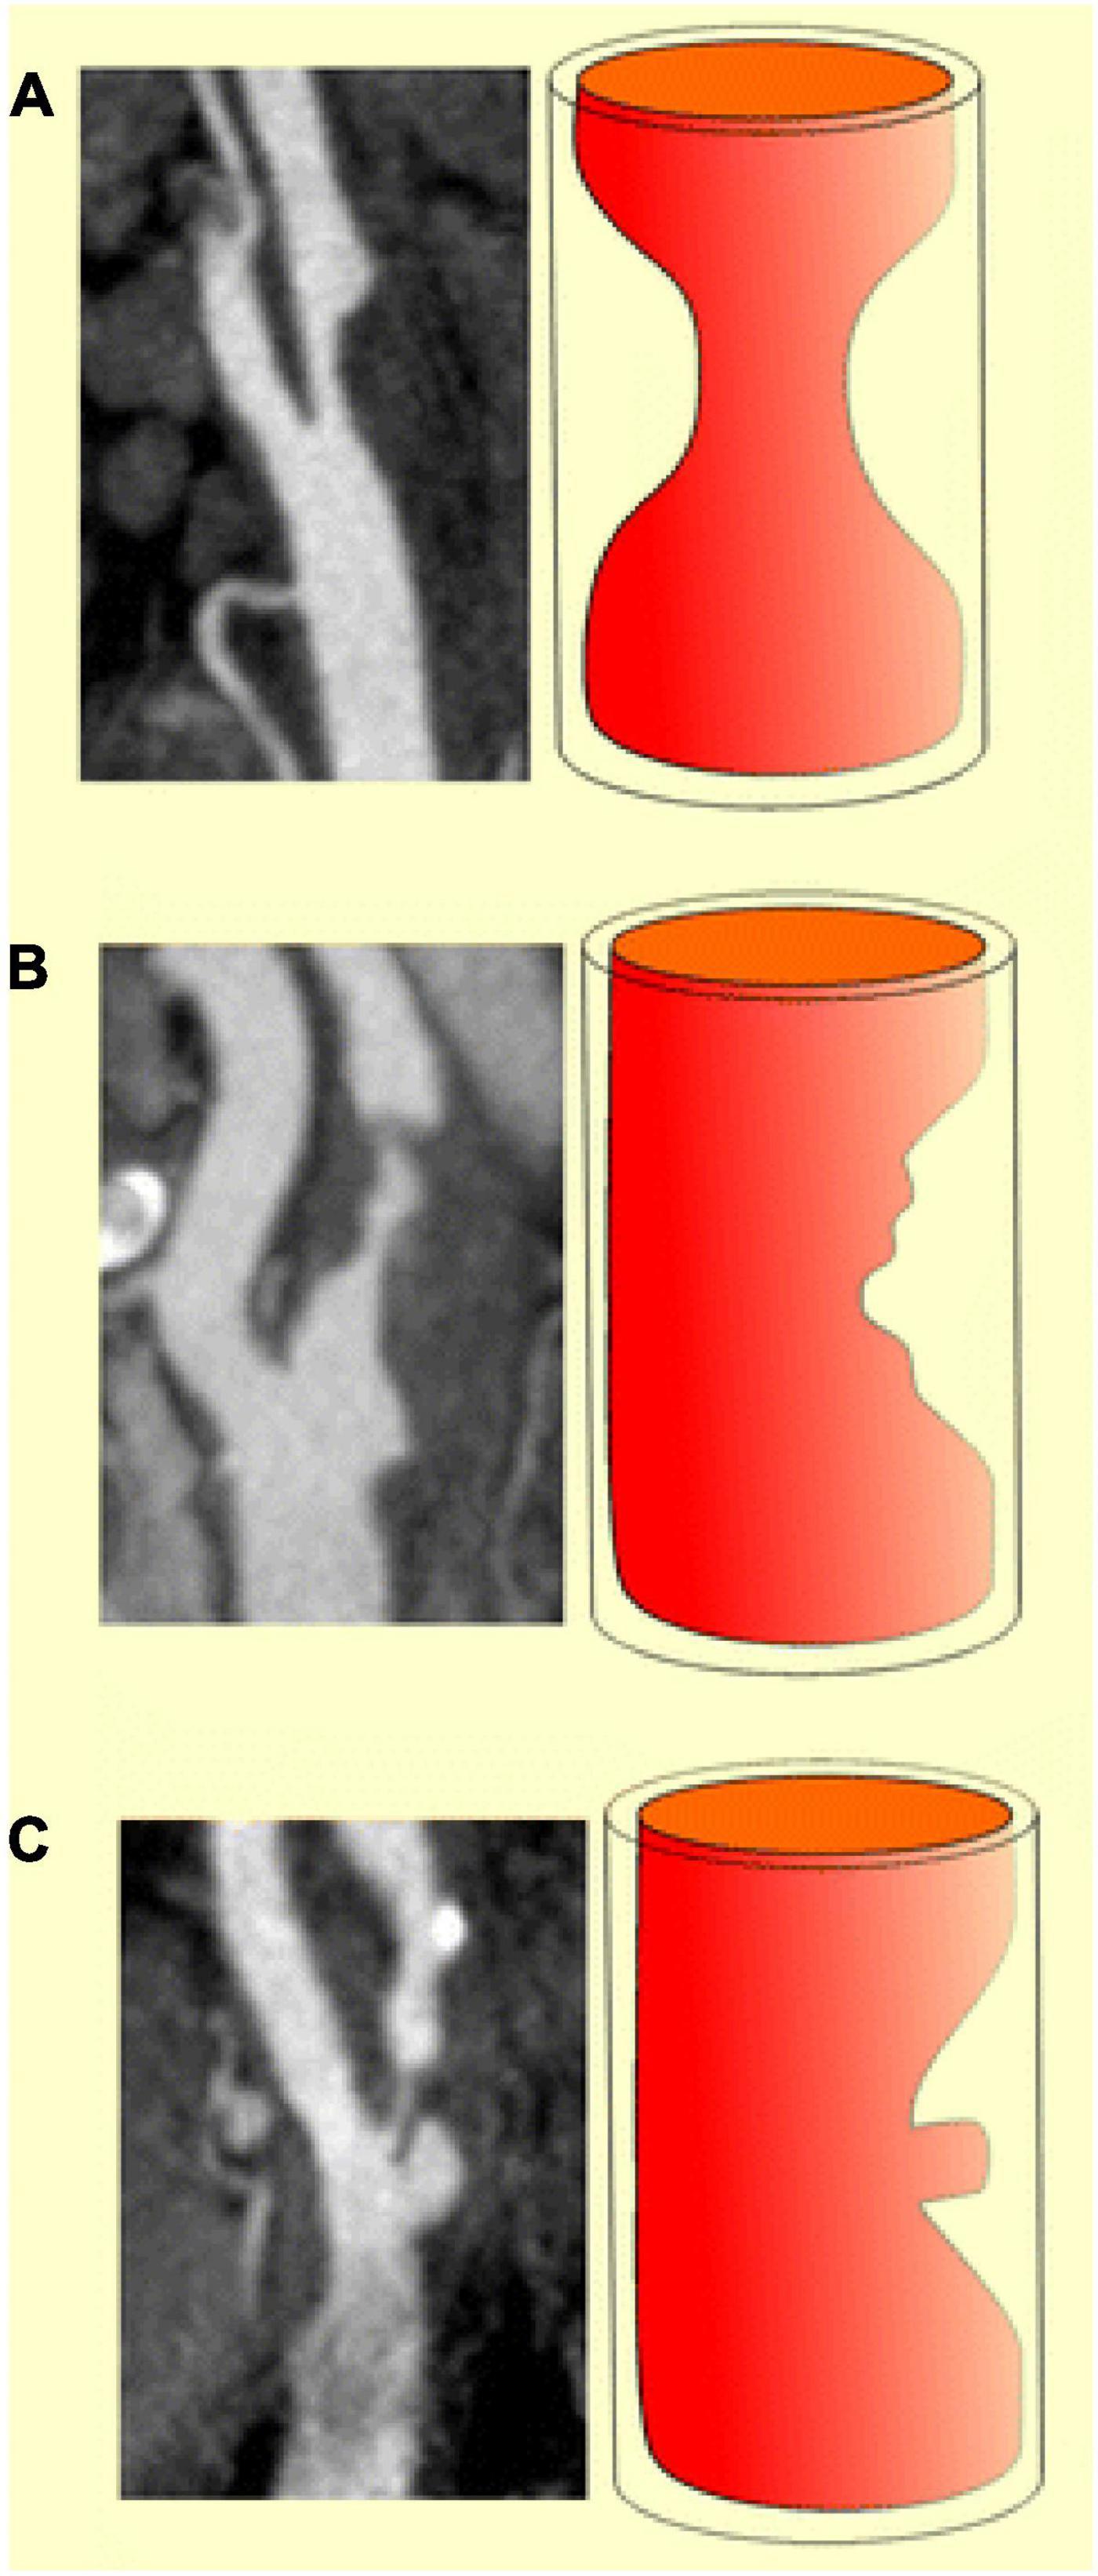 Frontiers | The utility of ultrasound and computed tomography in the  assessment of carotid artery plaque vulnerabilityâ€“A mini review